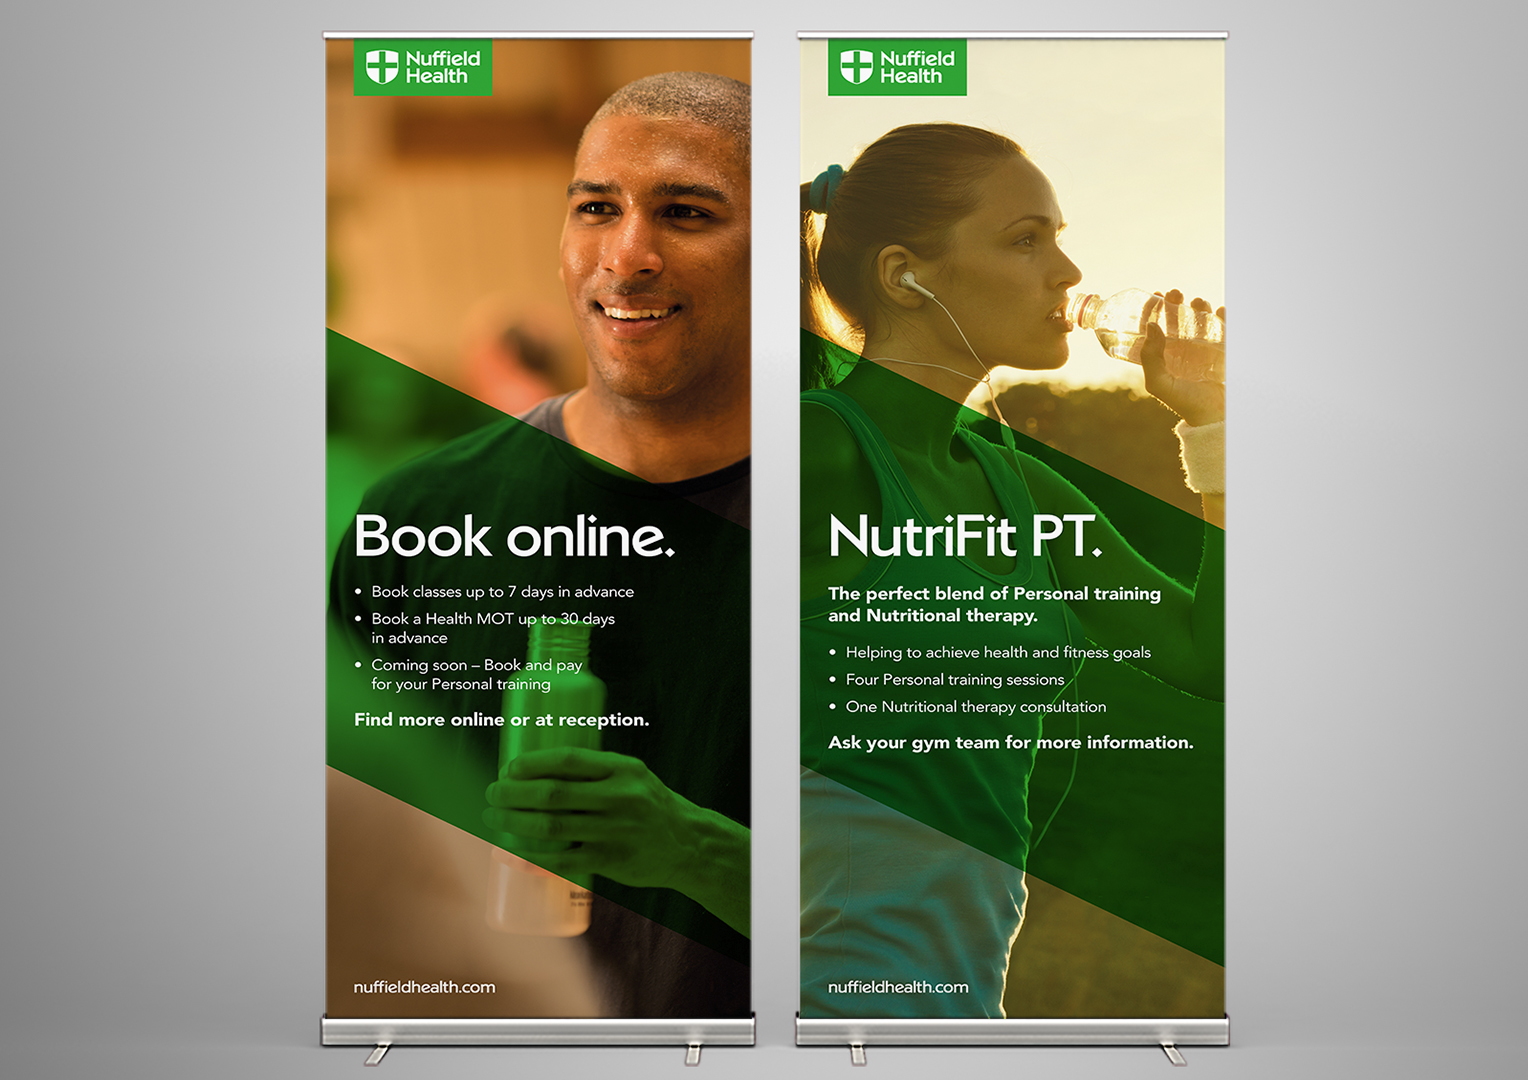 Nuffield Health. Popup Banners. Creative artwork and graphic design.